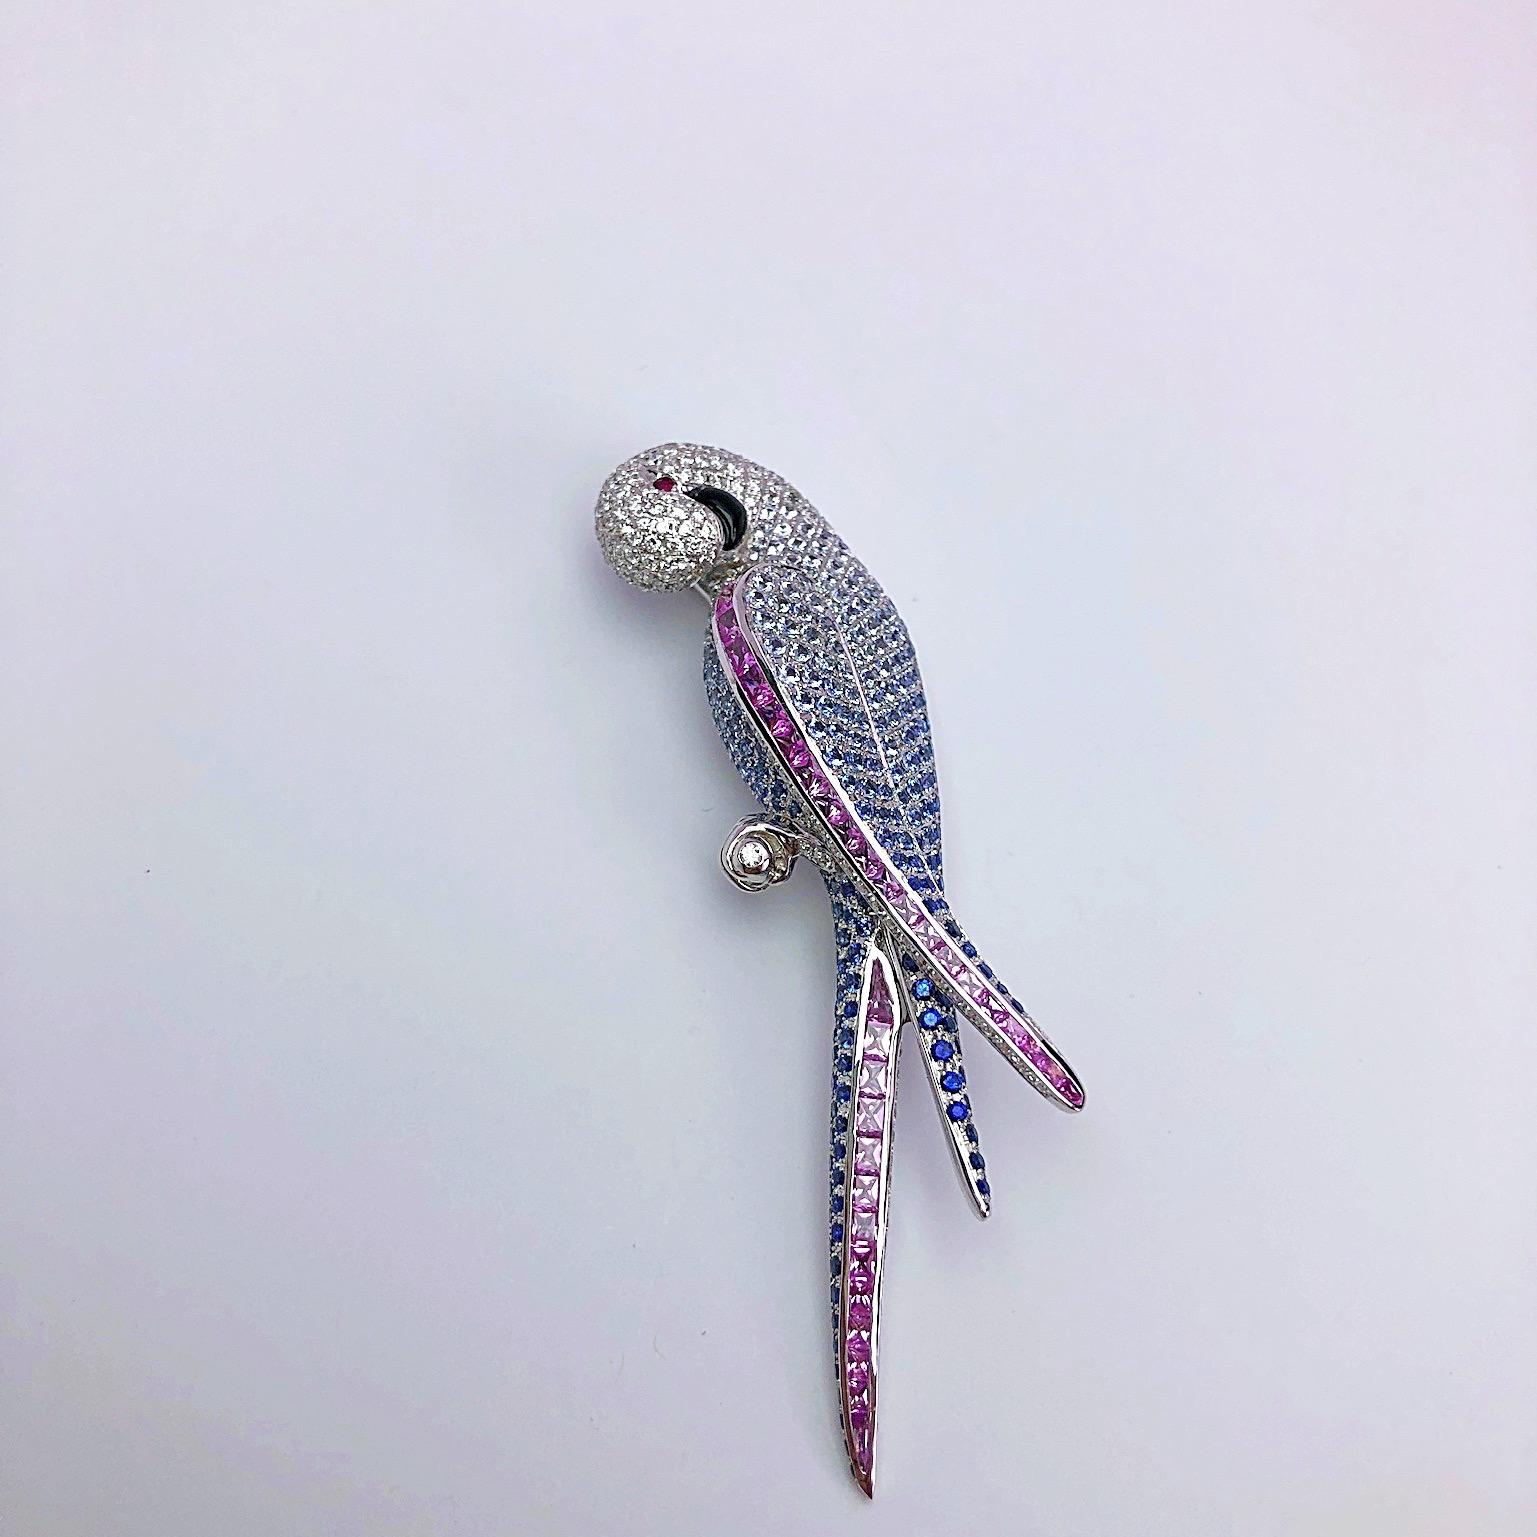 Designed in 18 karat white gold, this very graceful parrot brooch is a work of art. Pave white diamonds are set and subtly change to shades of blue and pink sapphires. A single round ruby is set for the eye and black onyx for the beak. The parrot